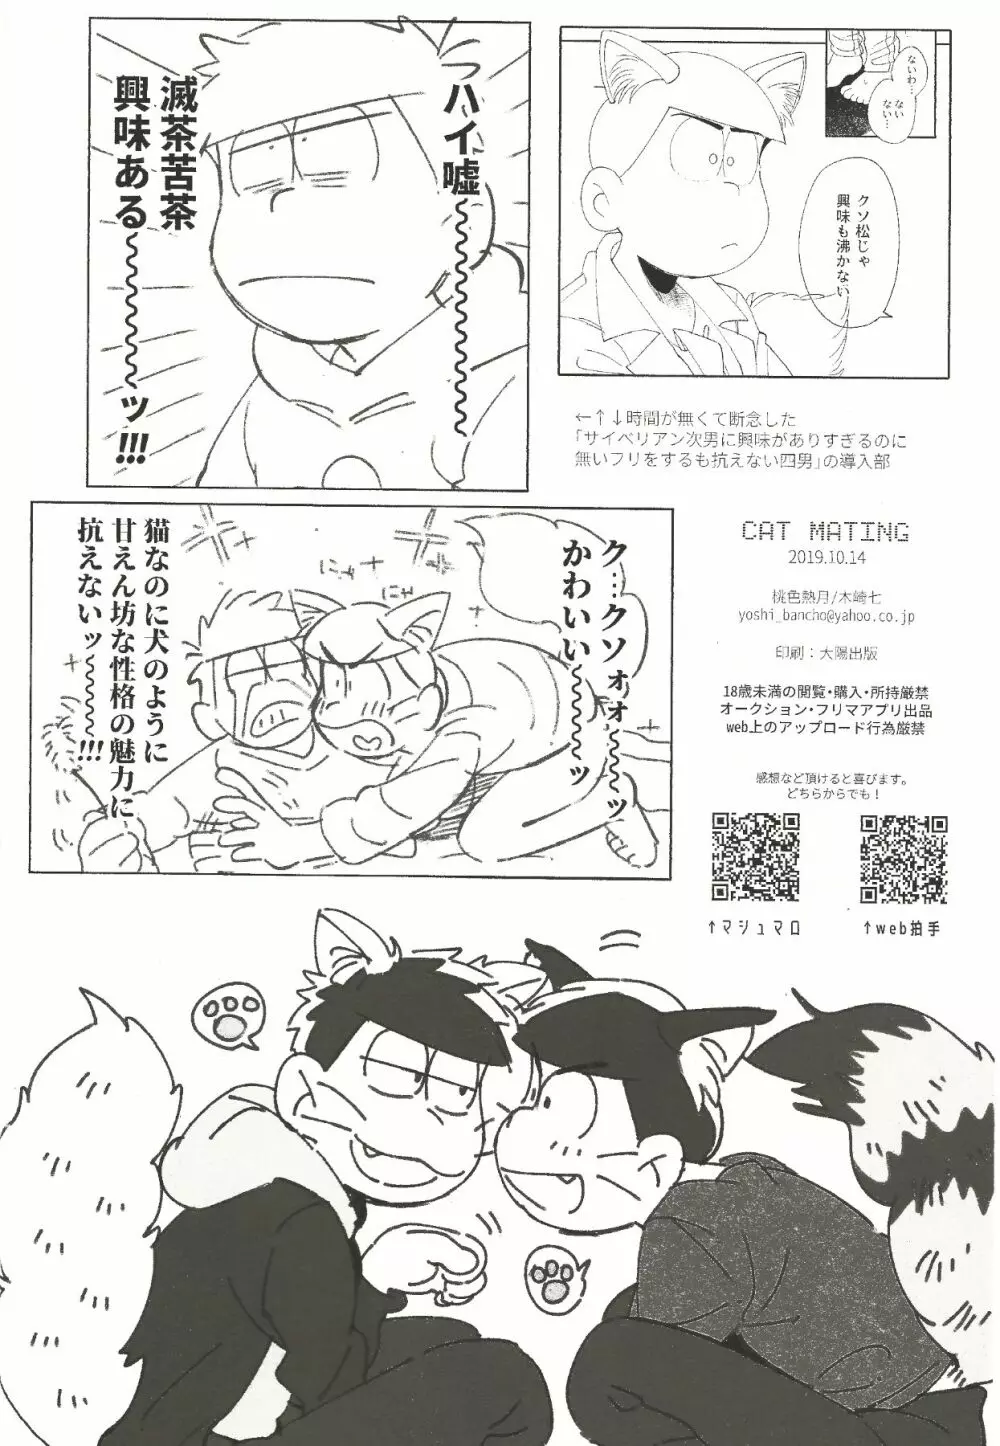 CAT MATING Page.21